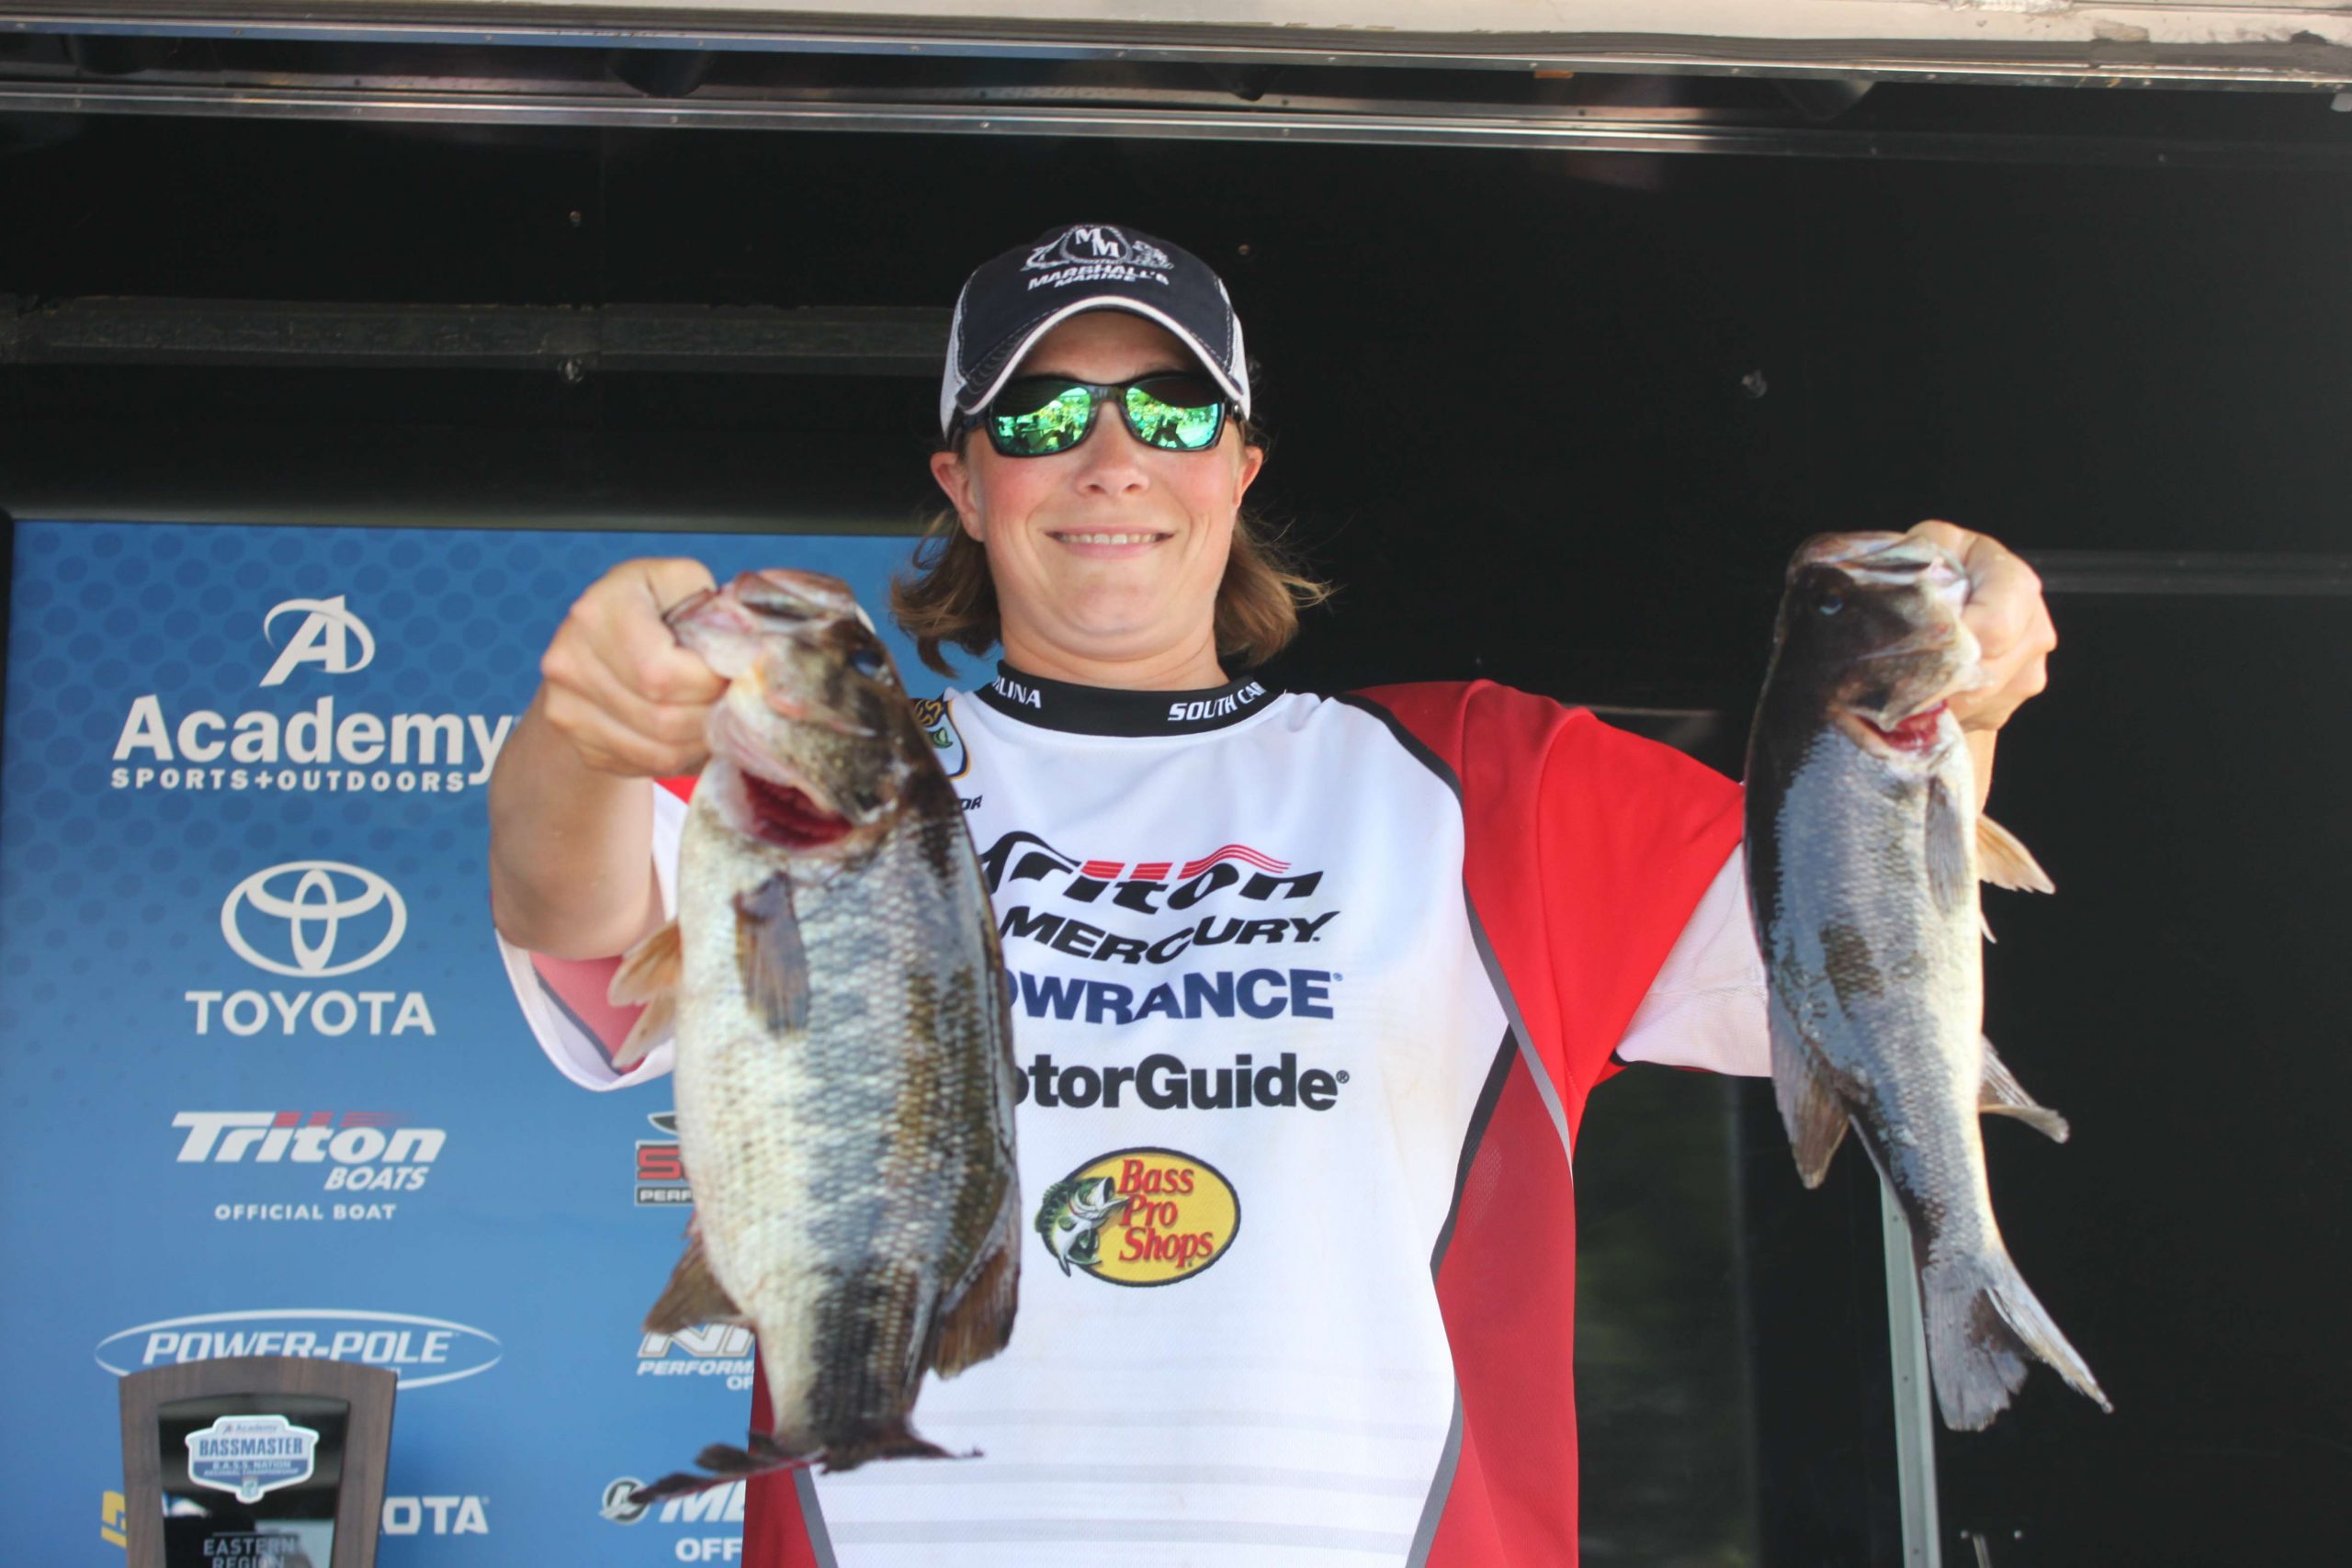 Speaking of non-boaters, how about the showing by hometown angler Stacey Proctor Jefferson? She finished second overall in the division with a three-day total of 15-13.